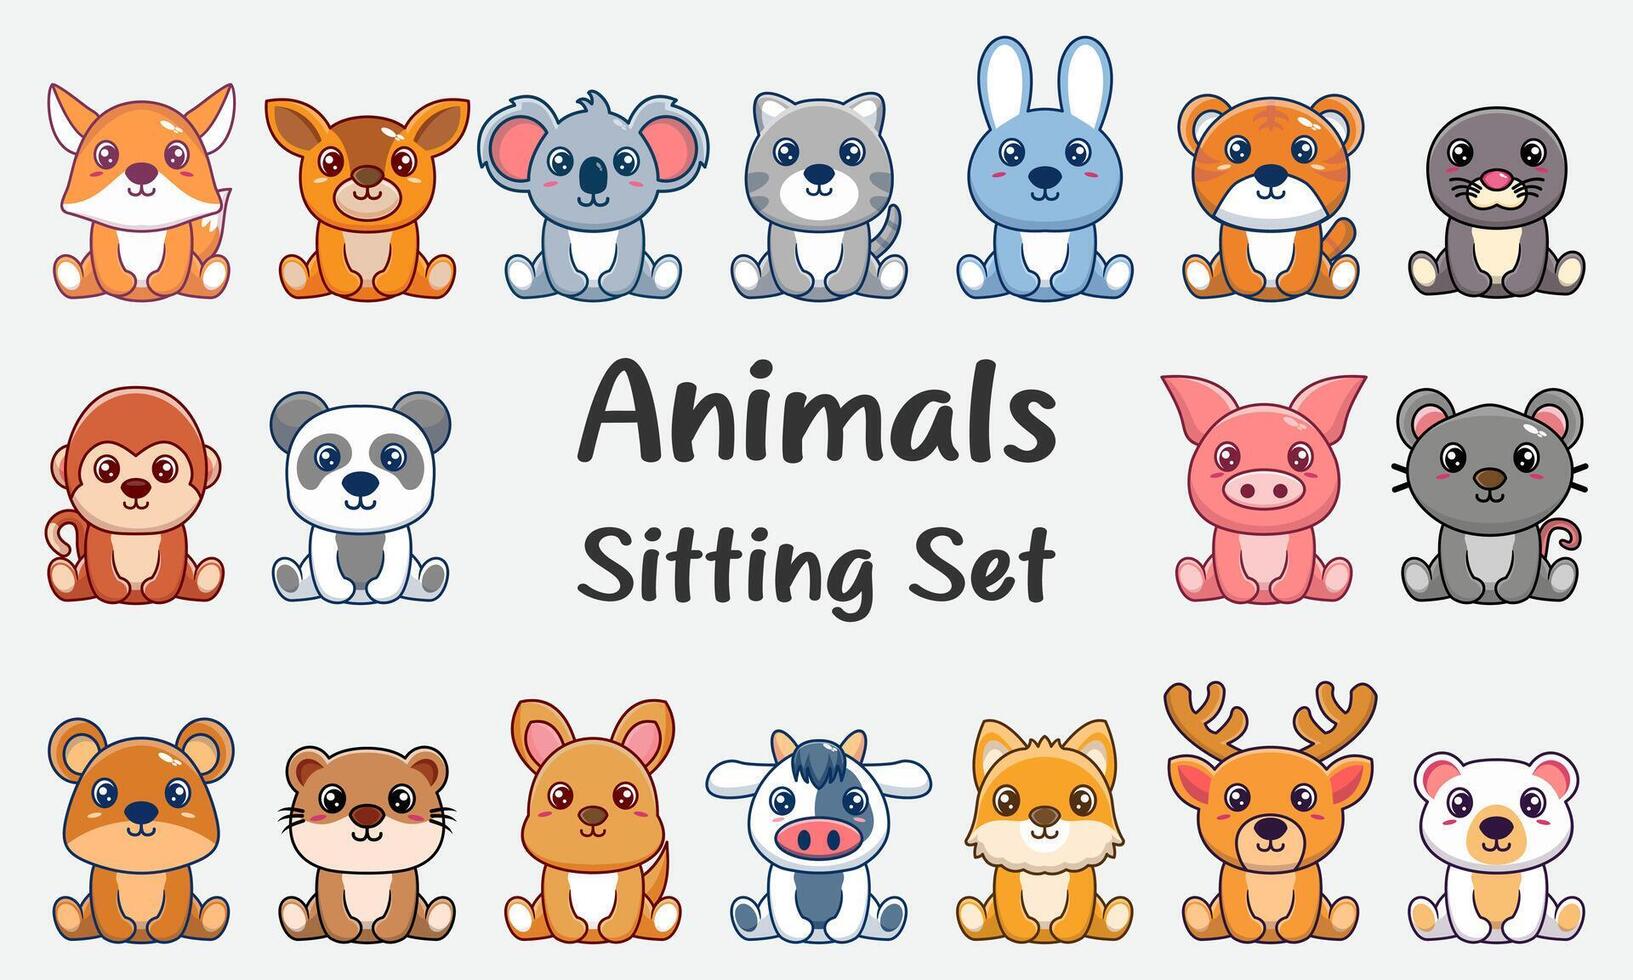 Hand drawn cartoon character animals sitting collection vector